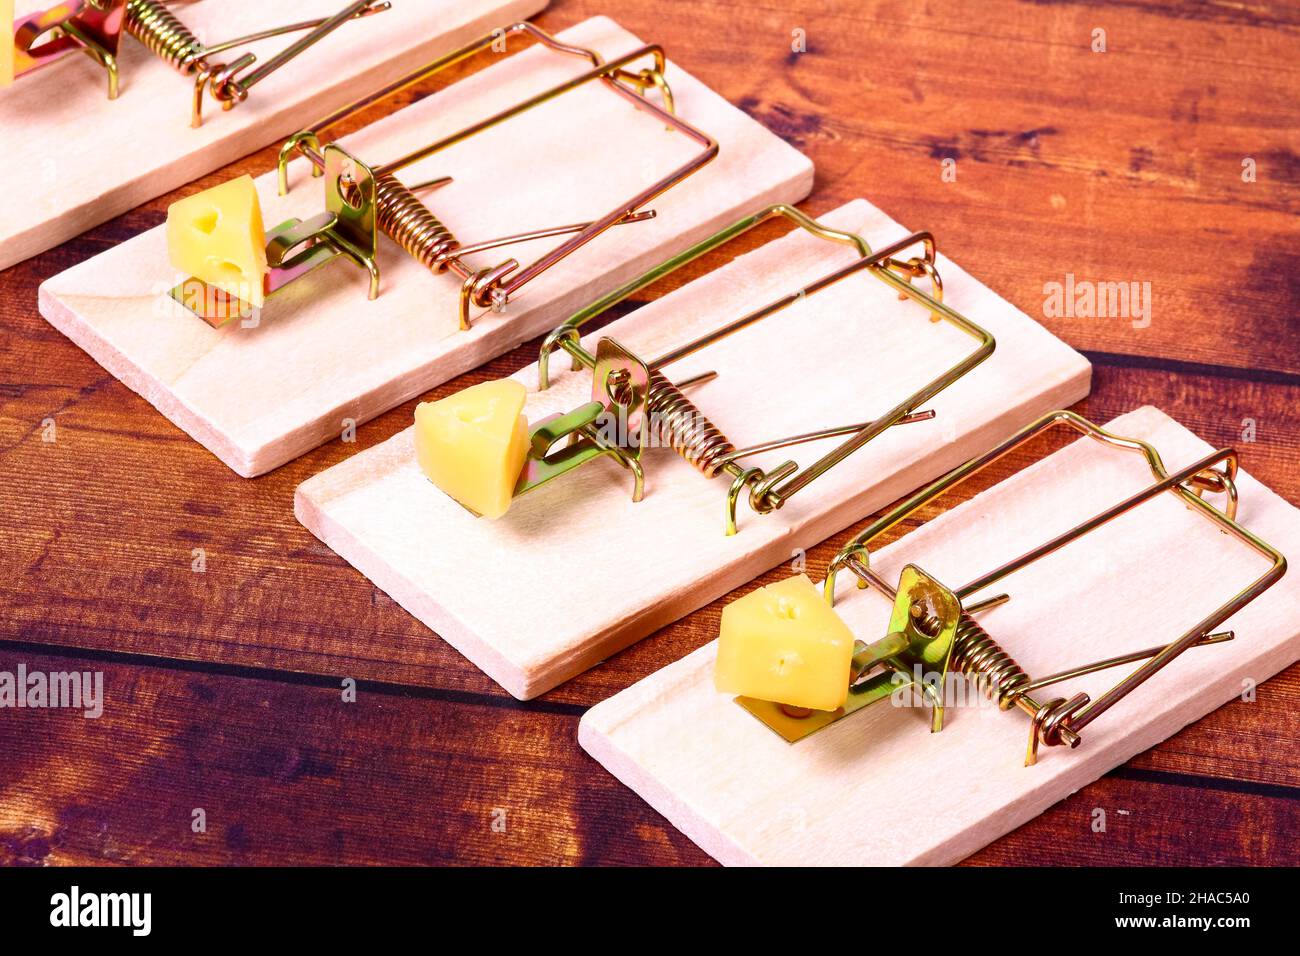 Four mousetraps baited with cheese, Mice infestation concept Stock Photo